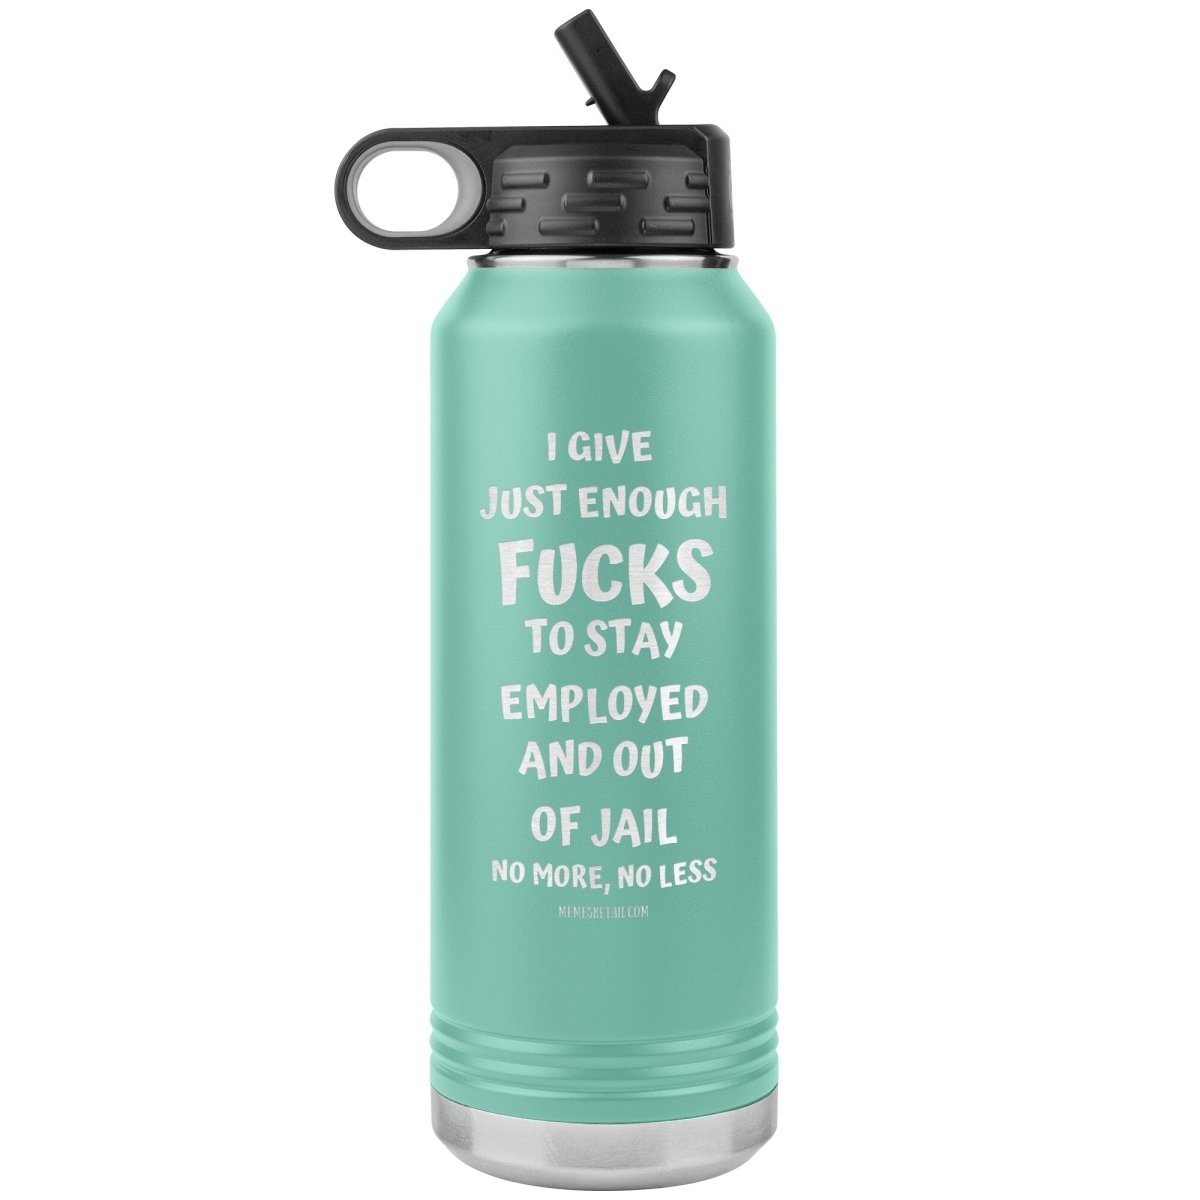 I Give Just Enough Fucks To Stay Employed And Out Of Jail, No More, No Less 32 Oz Water Bottle Tumbler, Teal - MemesRetail.com